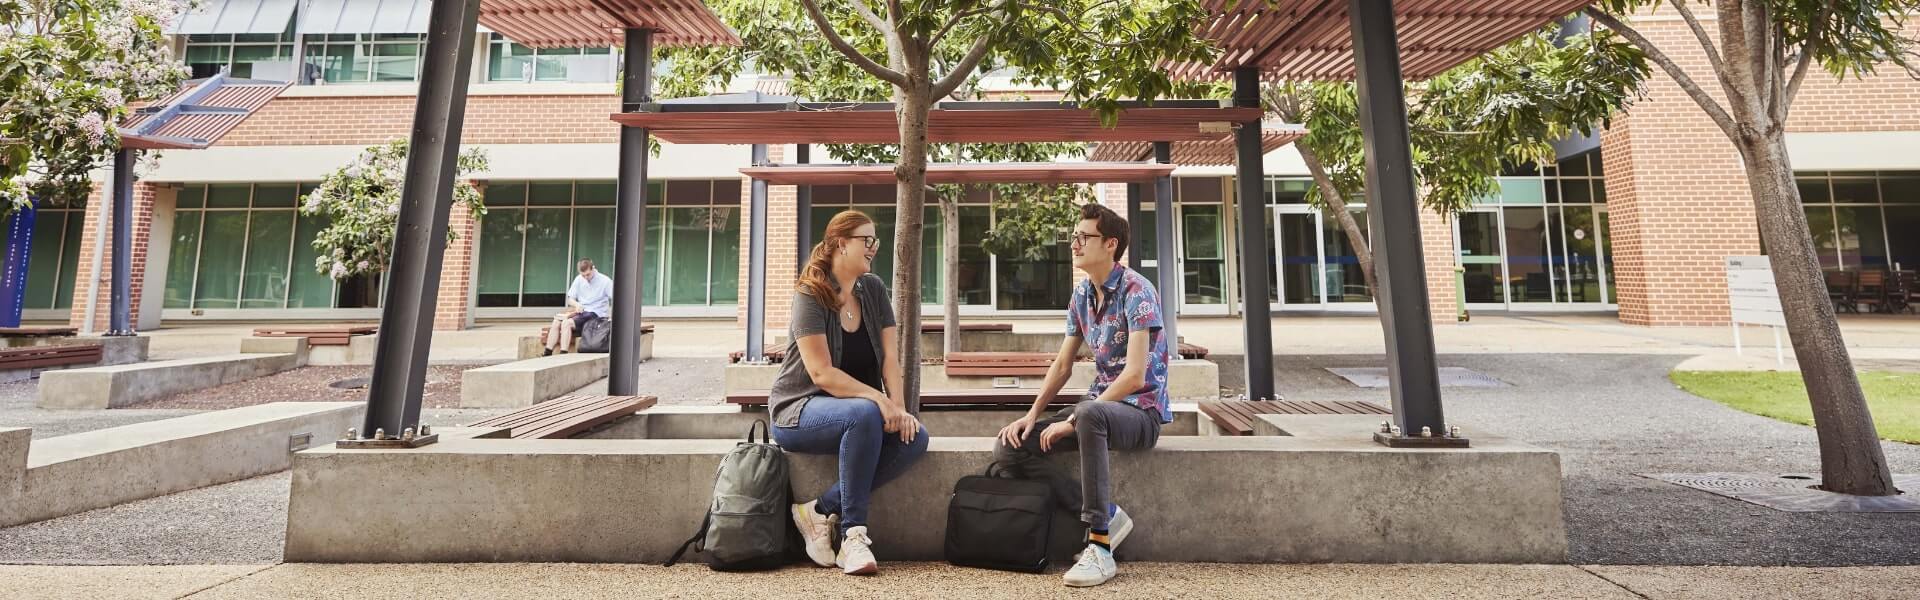 Two individuals sitting and conversing in a campus courtyard.